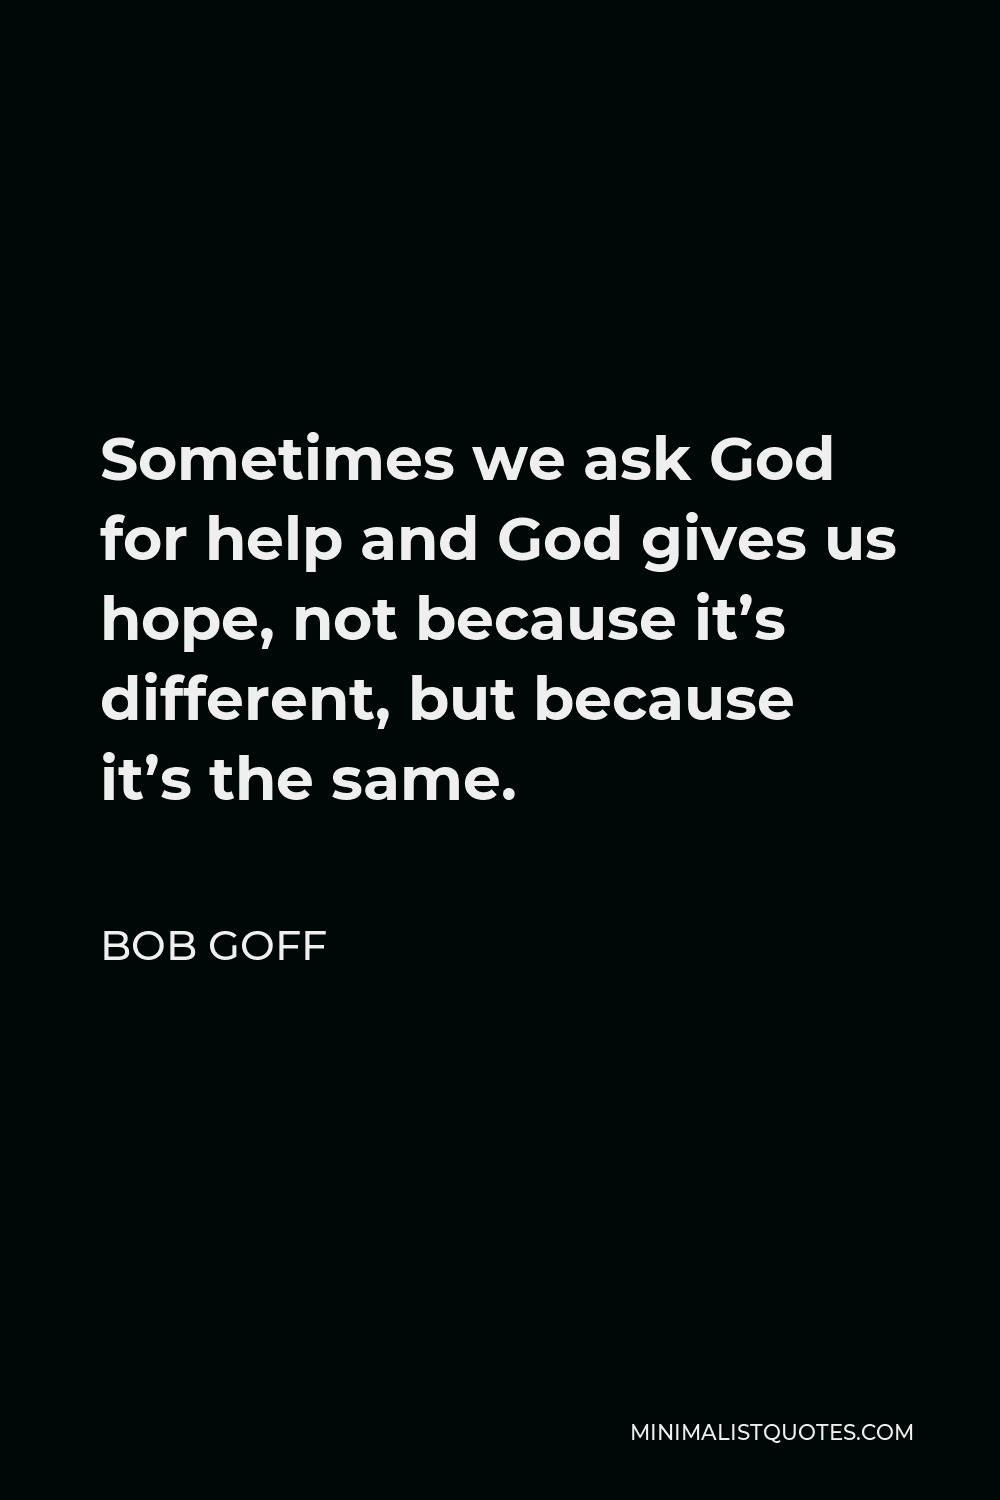 Bob Goff Quote - Sometimes we ask God for help and God gives us hope, not because it’s different, but because it’s the same.